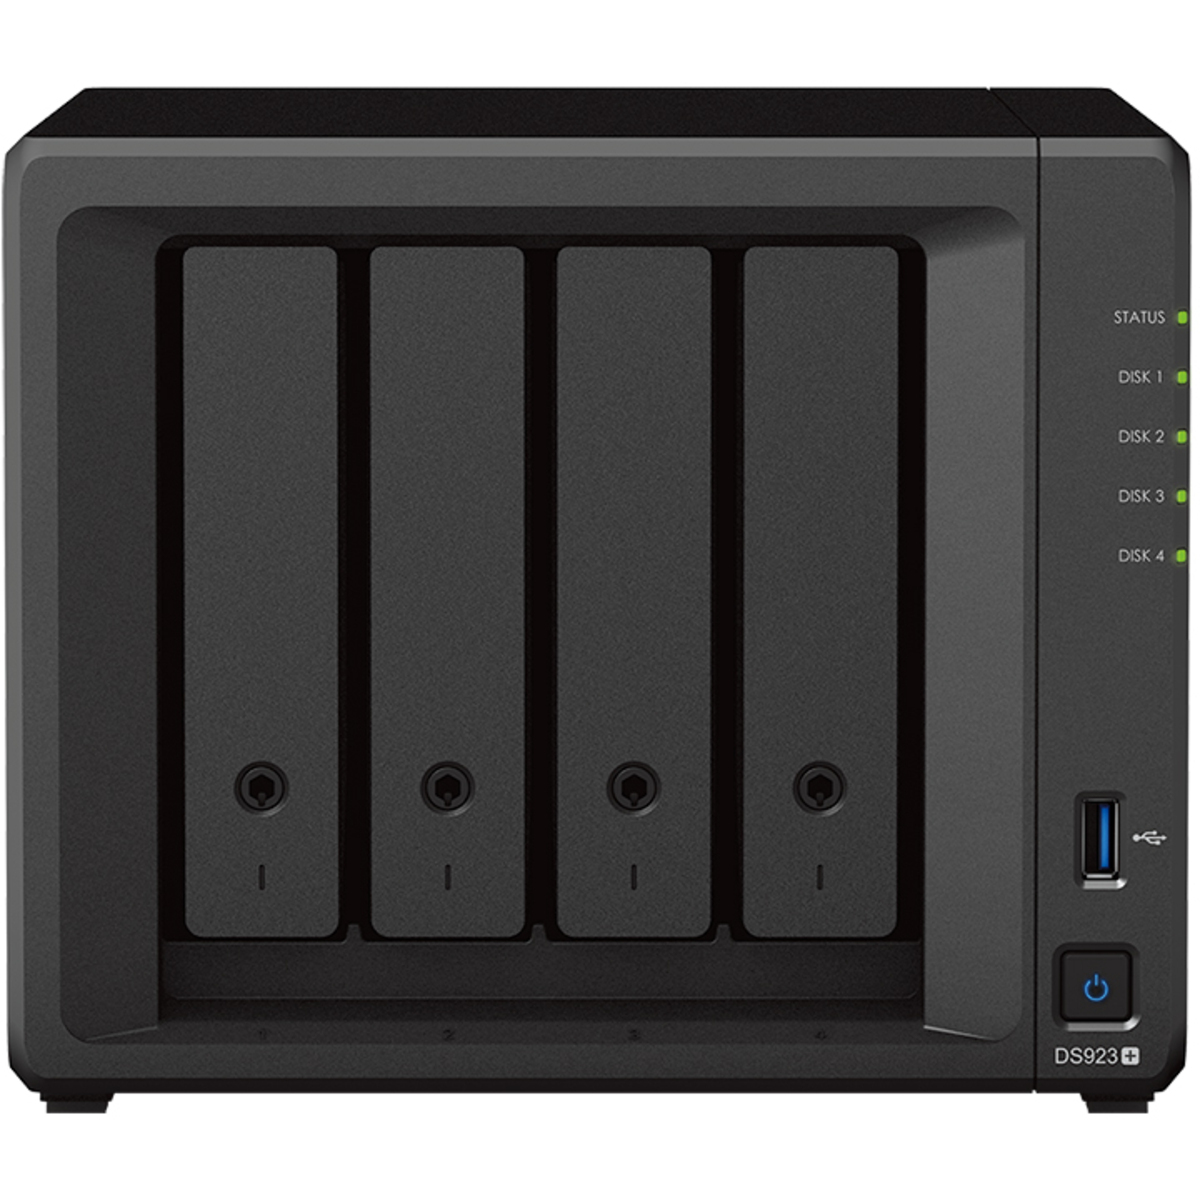 Synology DiskStation DS923+ 96tb 4-Bay Desktop Multimedia / Power User / Business NAS - Network Attached Storage Device 4x24tb Western Digital Red Pro WD240KFGX 3.5 7200rpm SATA 6Gb/s HDD NAS Class Drives Installed - Burn-In Tested - ON SALE - FREE RAM UPGRADE DiskStation DS923+